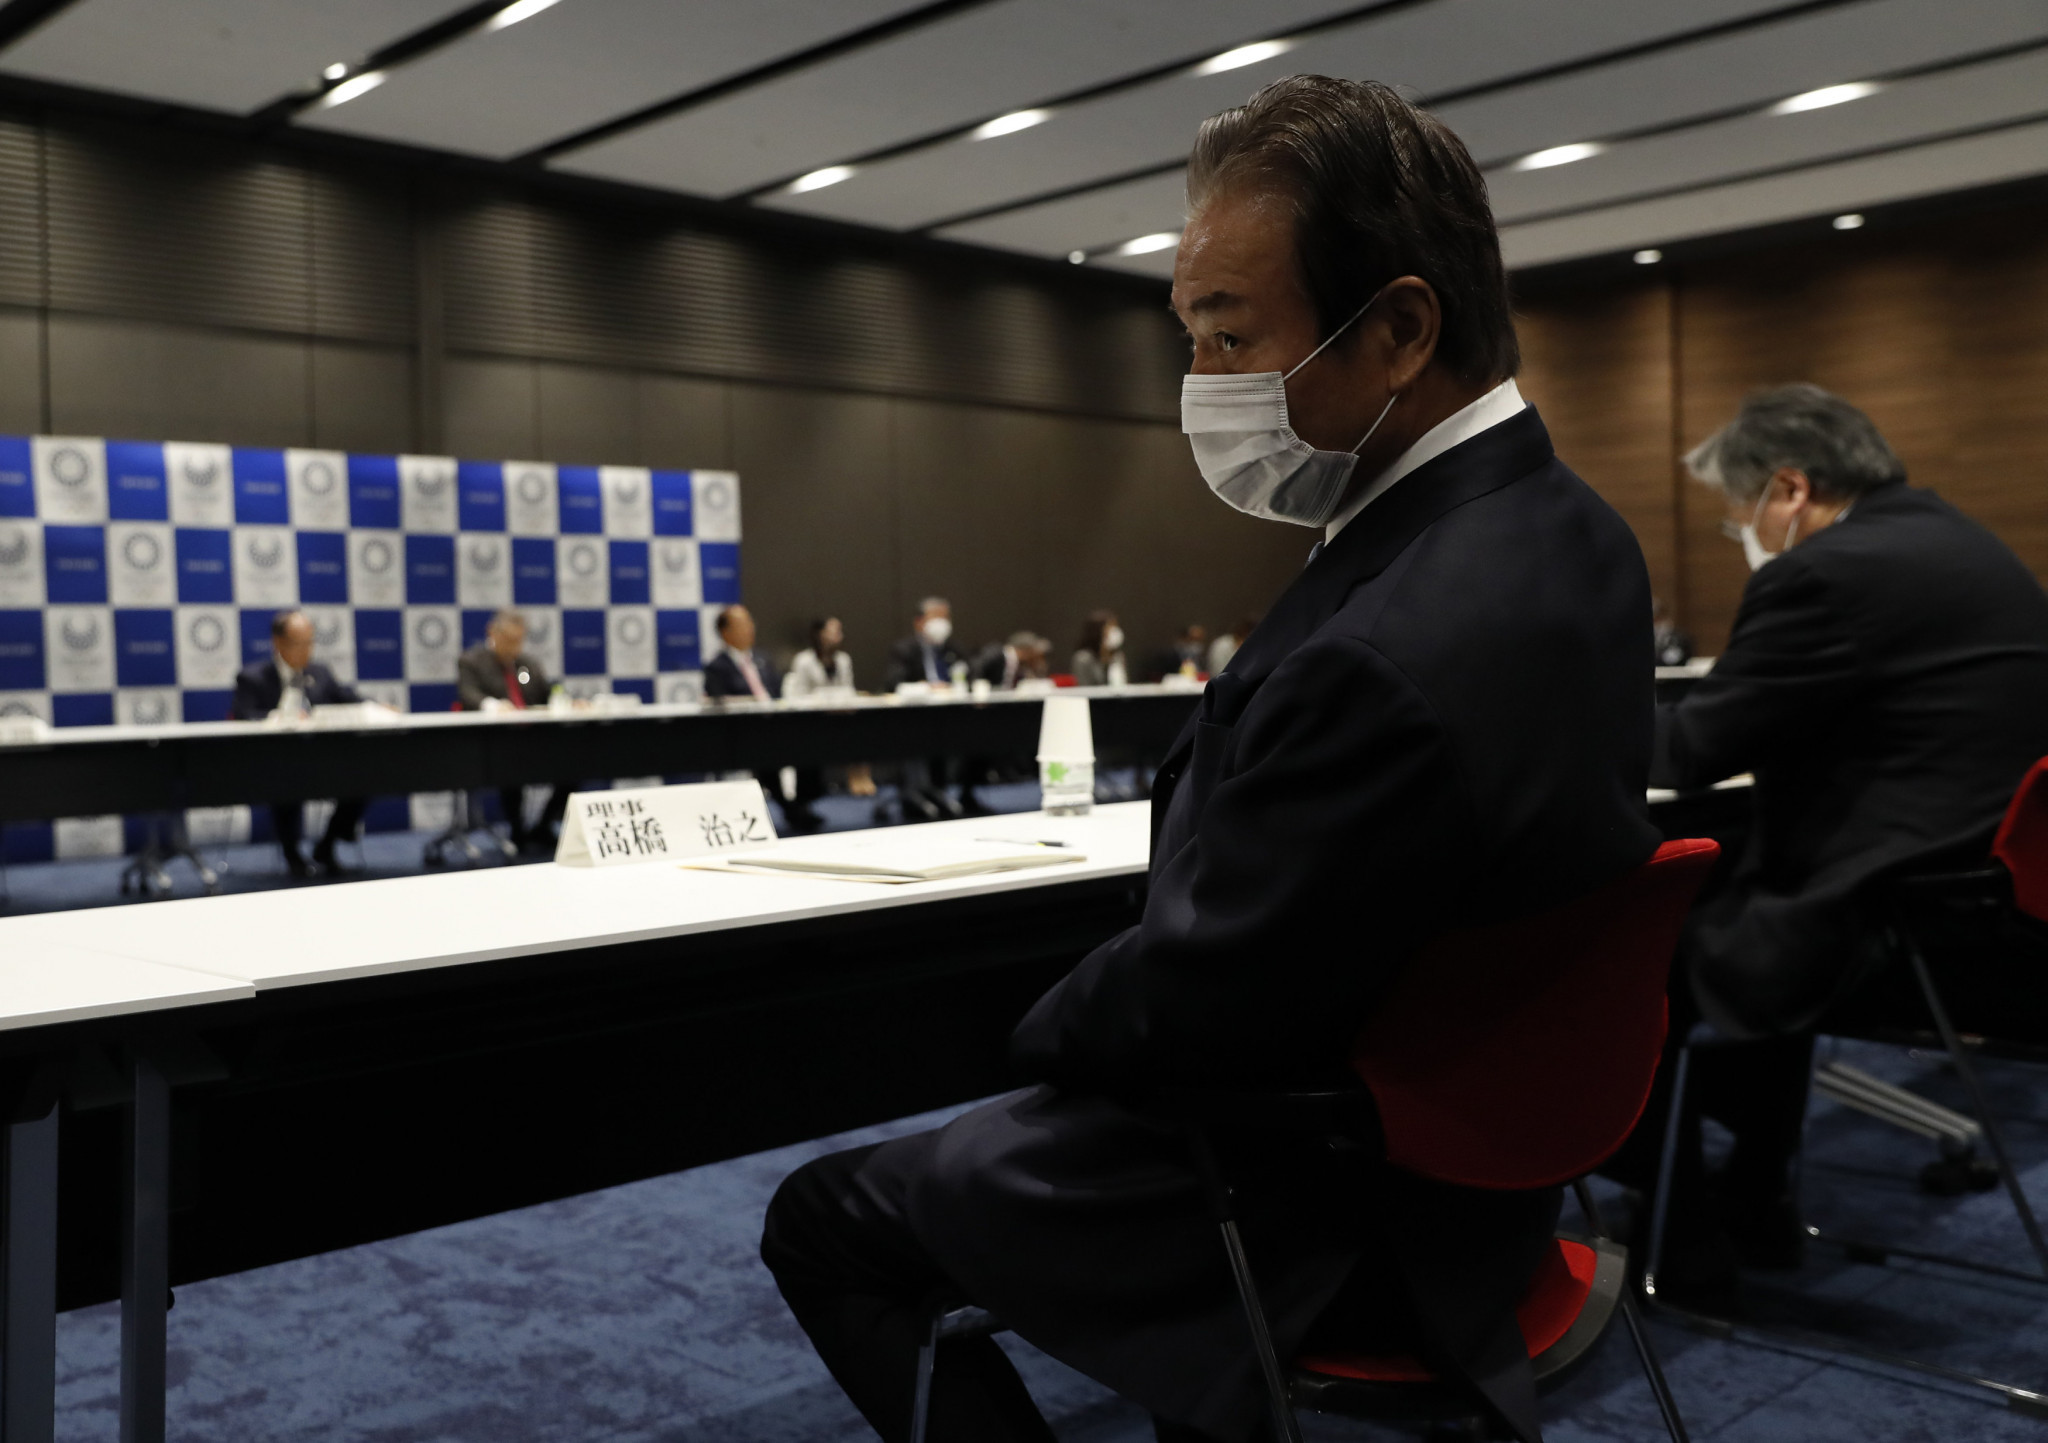 Haruyuki Takahashi is embroiled in a bribery scandal related to the Tokyo 2020 Olympics ©Getty Images